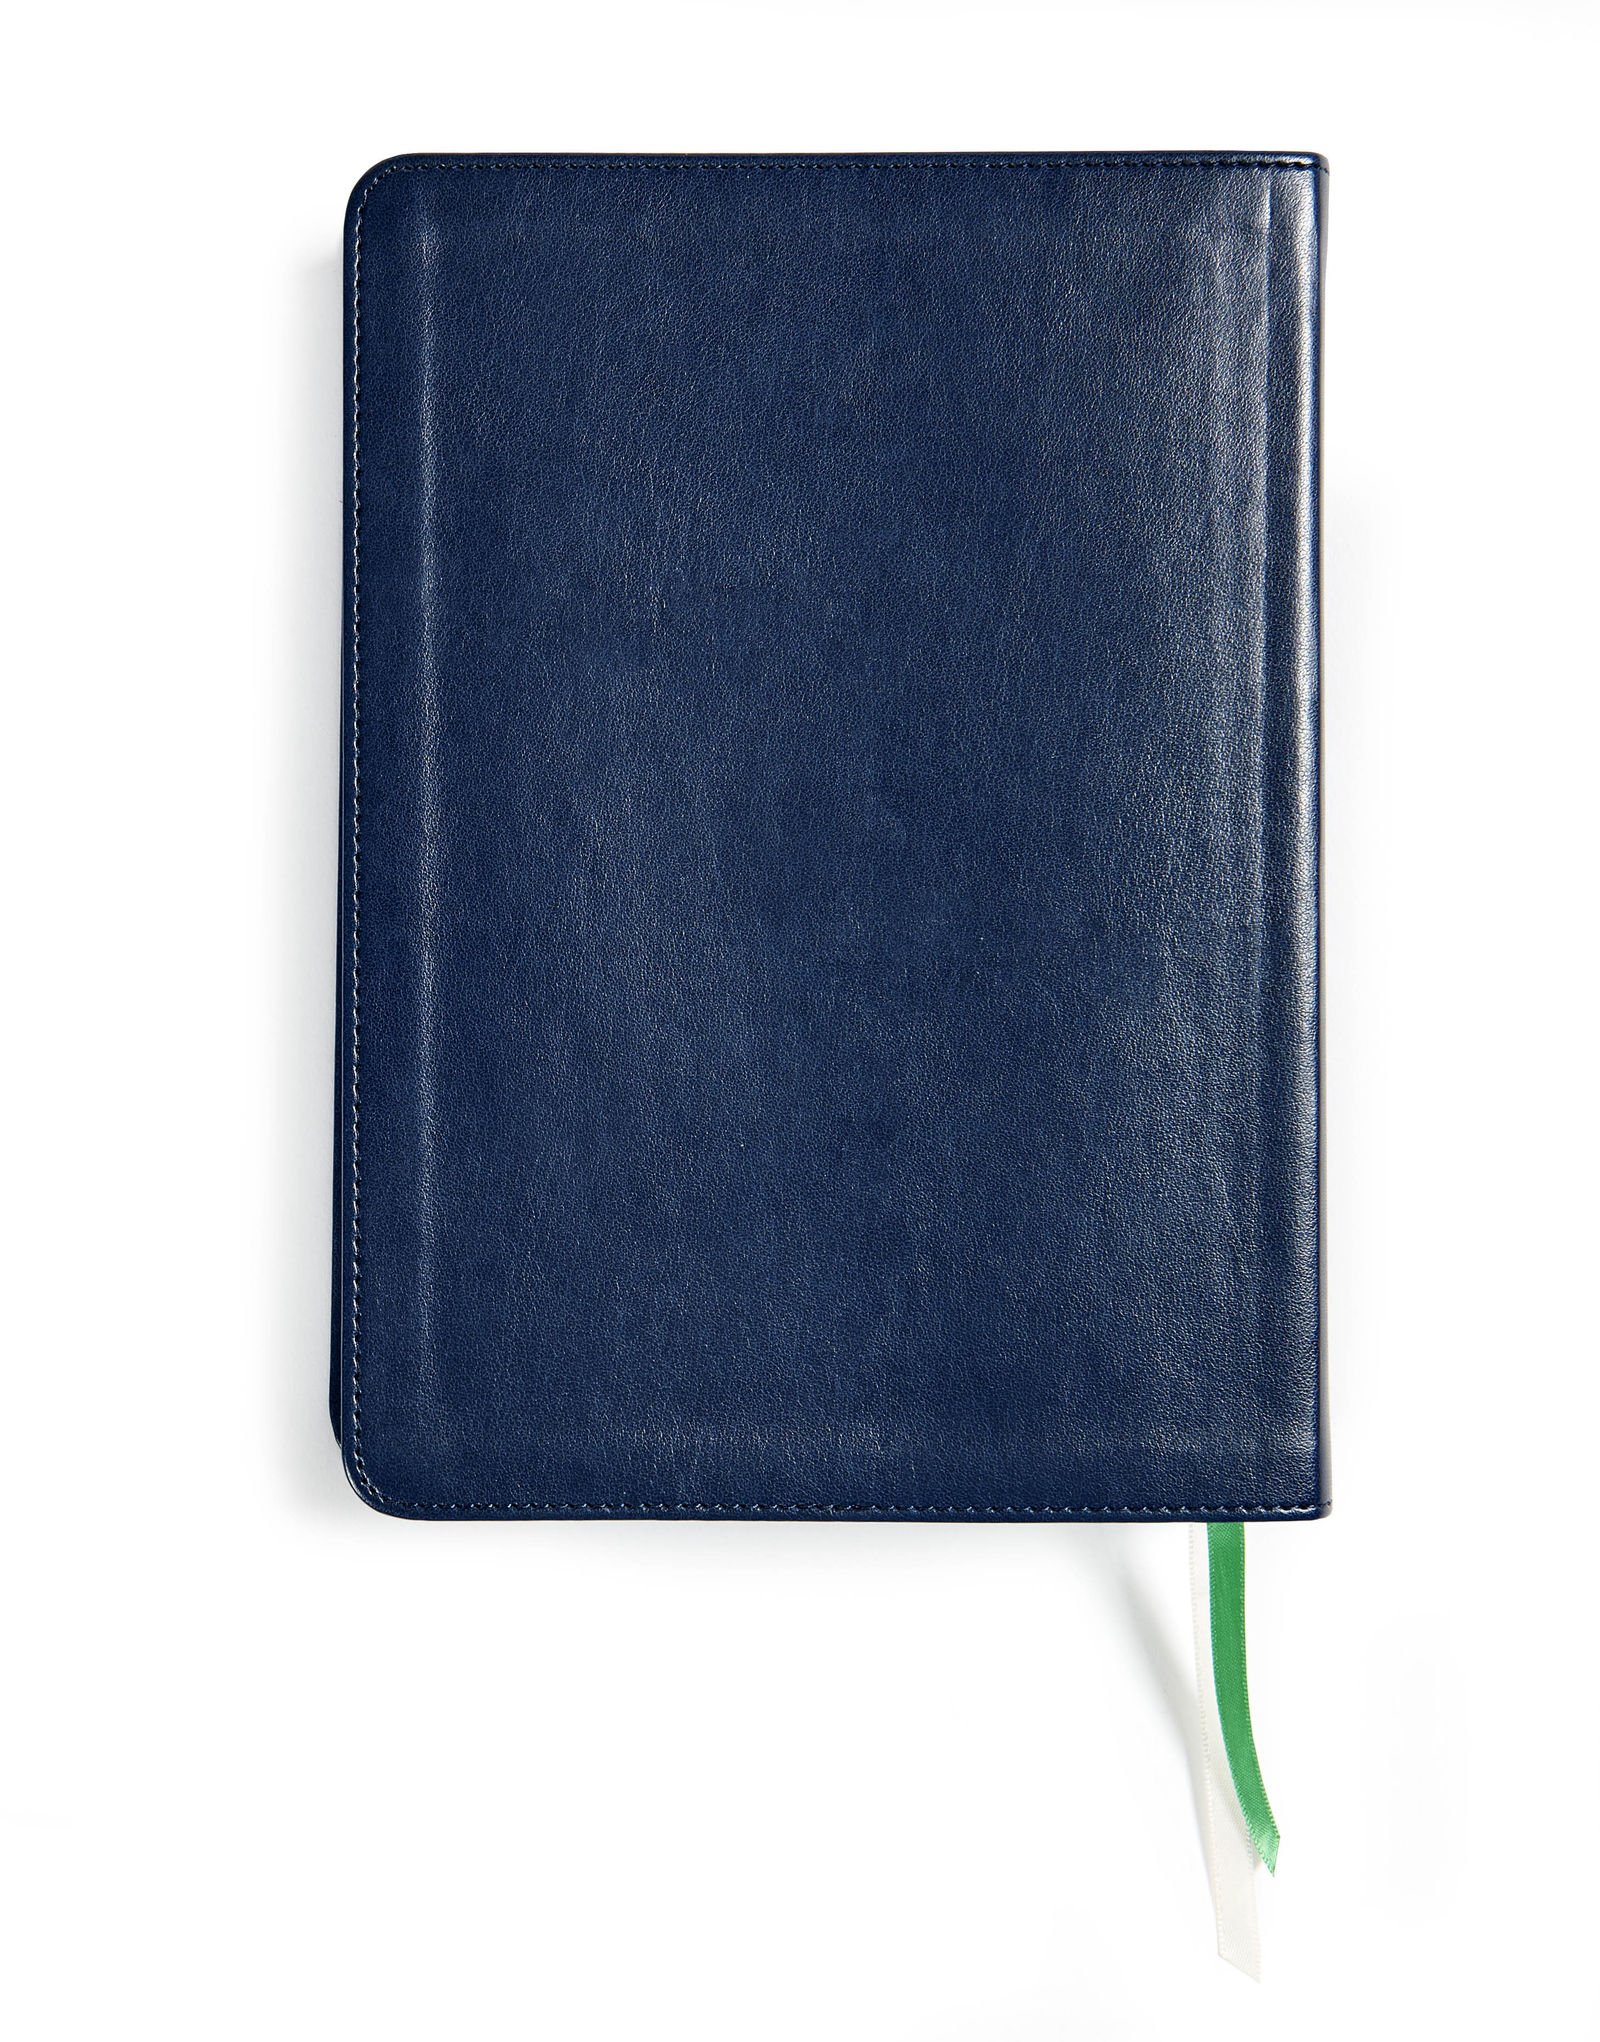 CSB She Reads Truth Bible, Navy LeatherTouch, Black Letter, Full-Color Design, Wide Margins, Notetaking Space, Devotionals, Reading Plans, Easy-to-Read Bible Serif Type